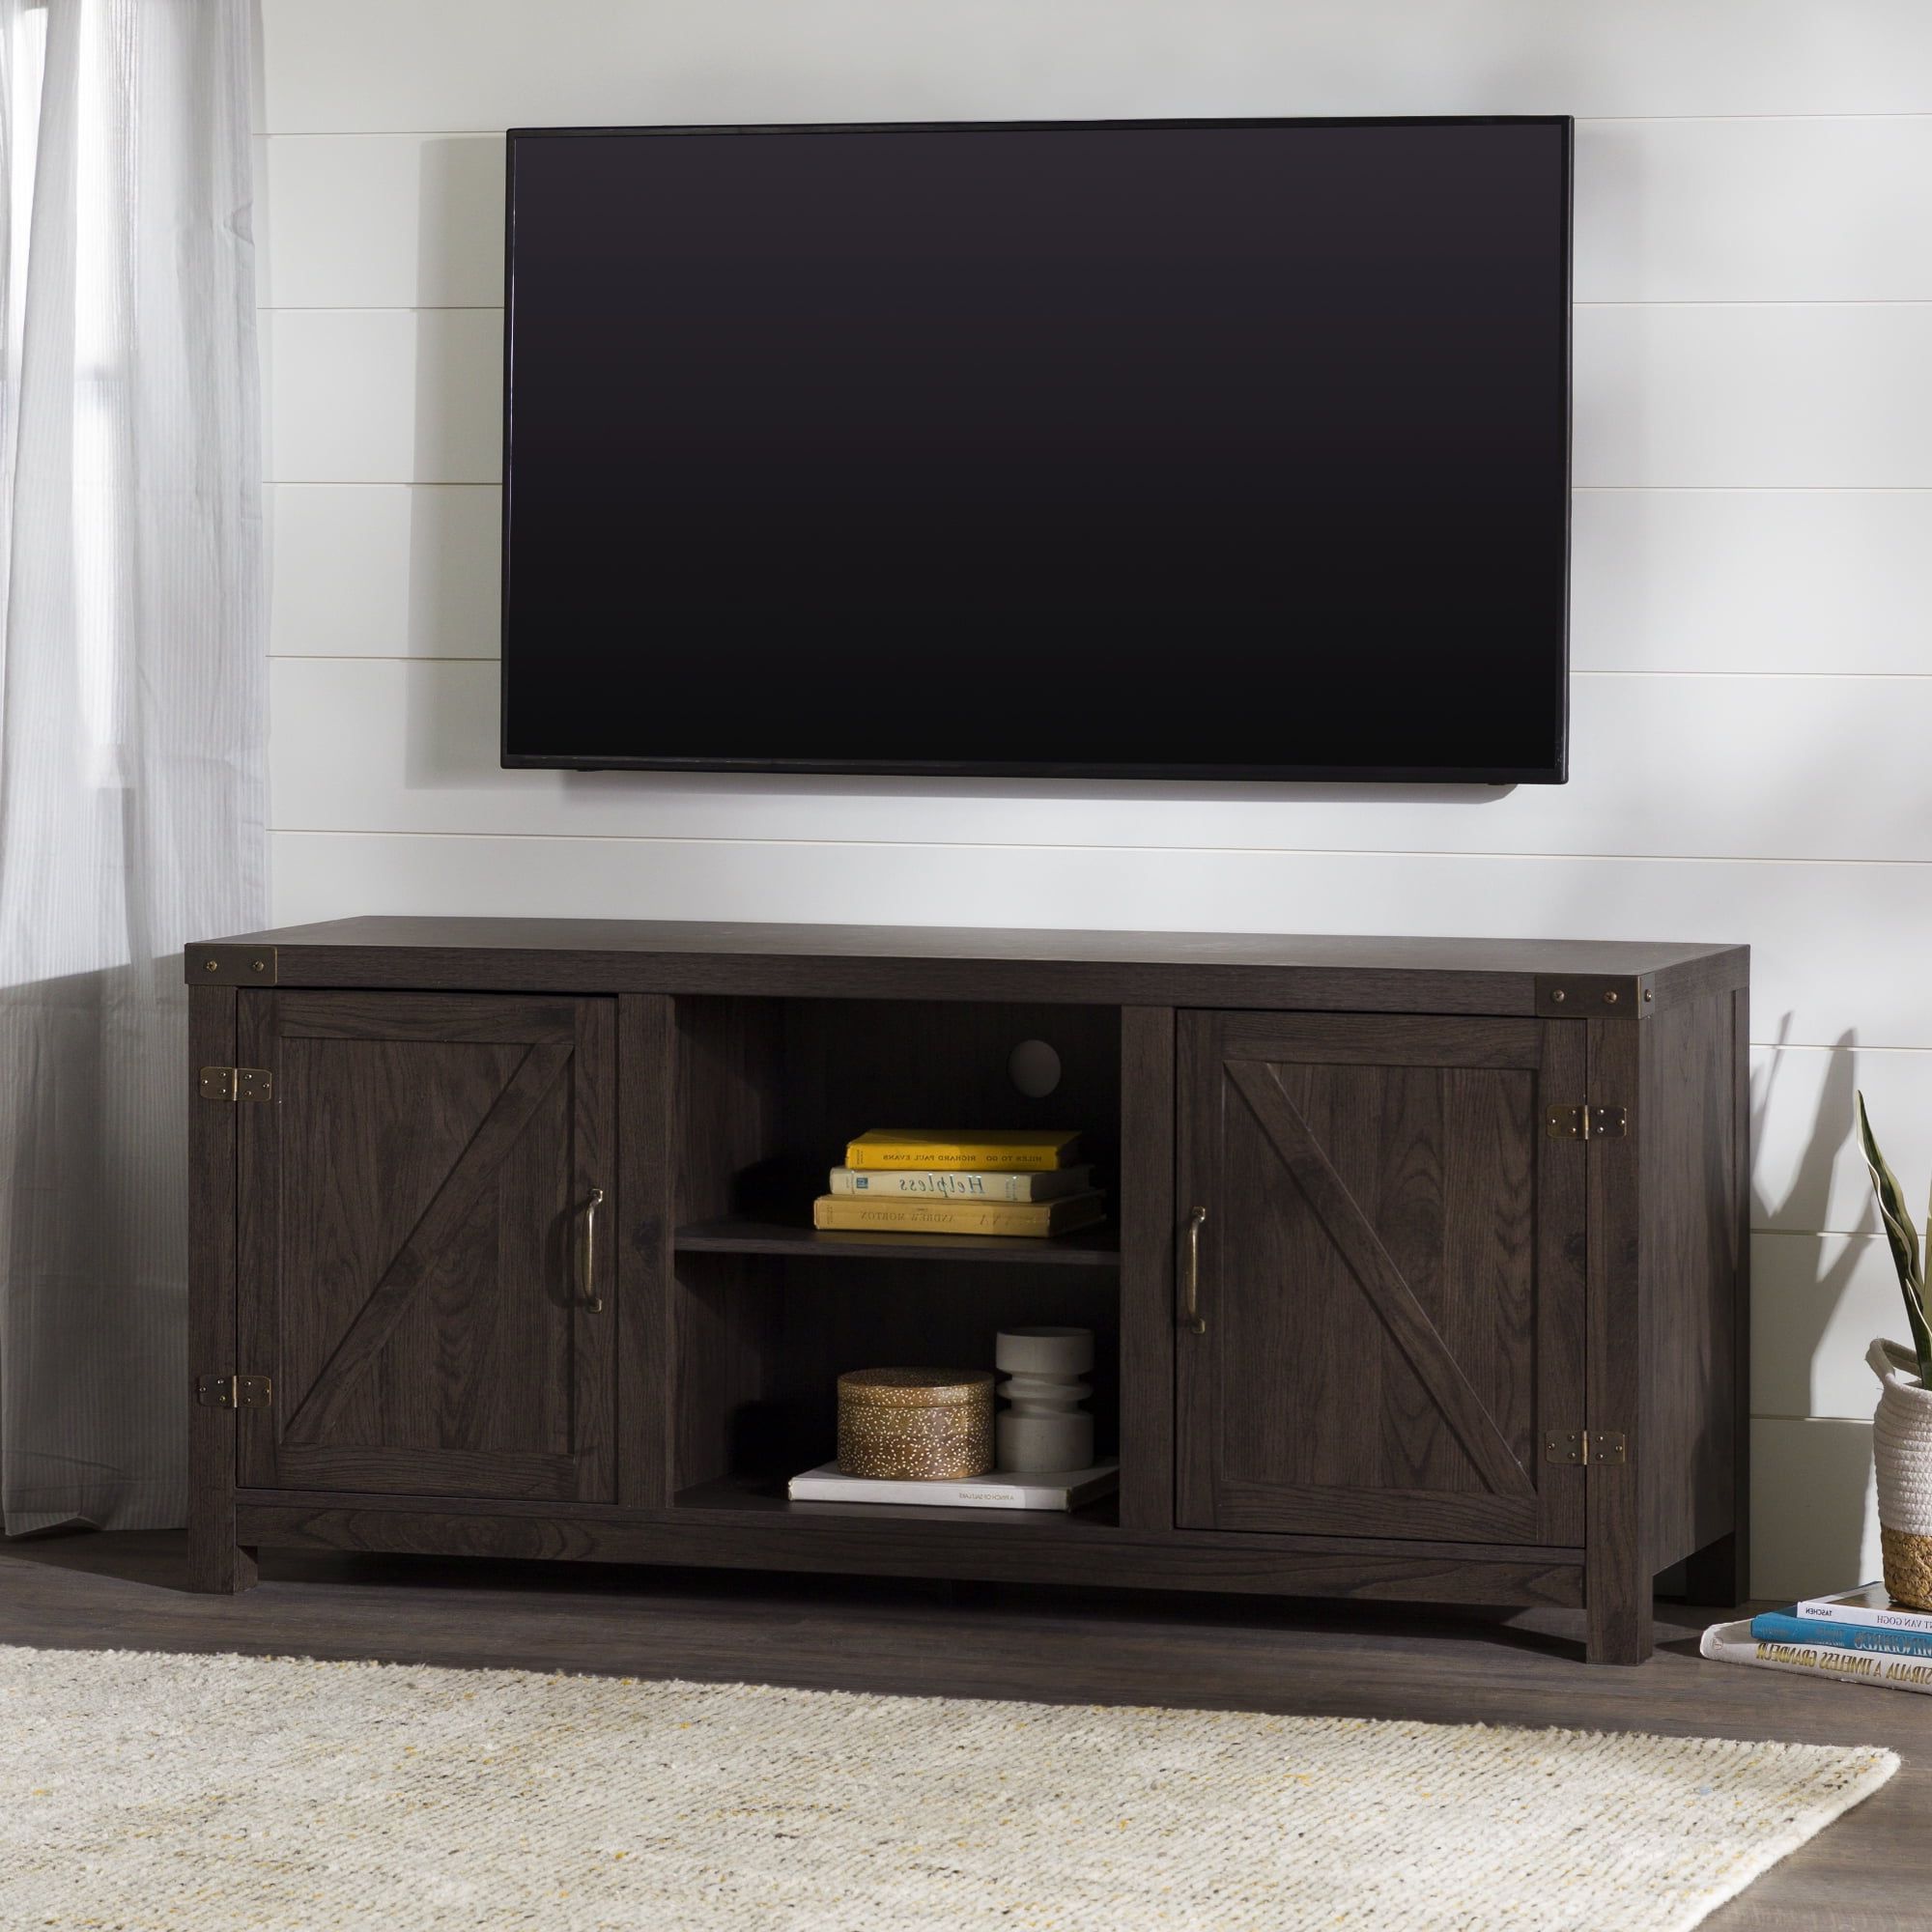 Woven Paths Modern Farmhouse Barn Door Tv Stand For Tvs Up To 65", Sable –  Walmart With Regard To Modern Farmhouse Barn Tv Stands (View 9 of 20)